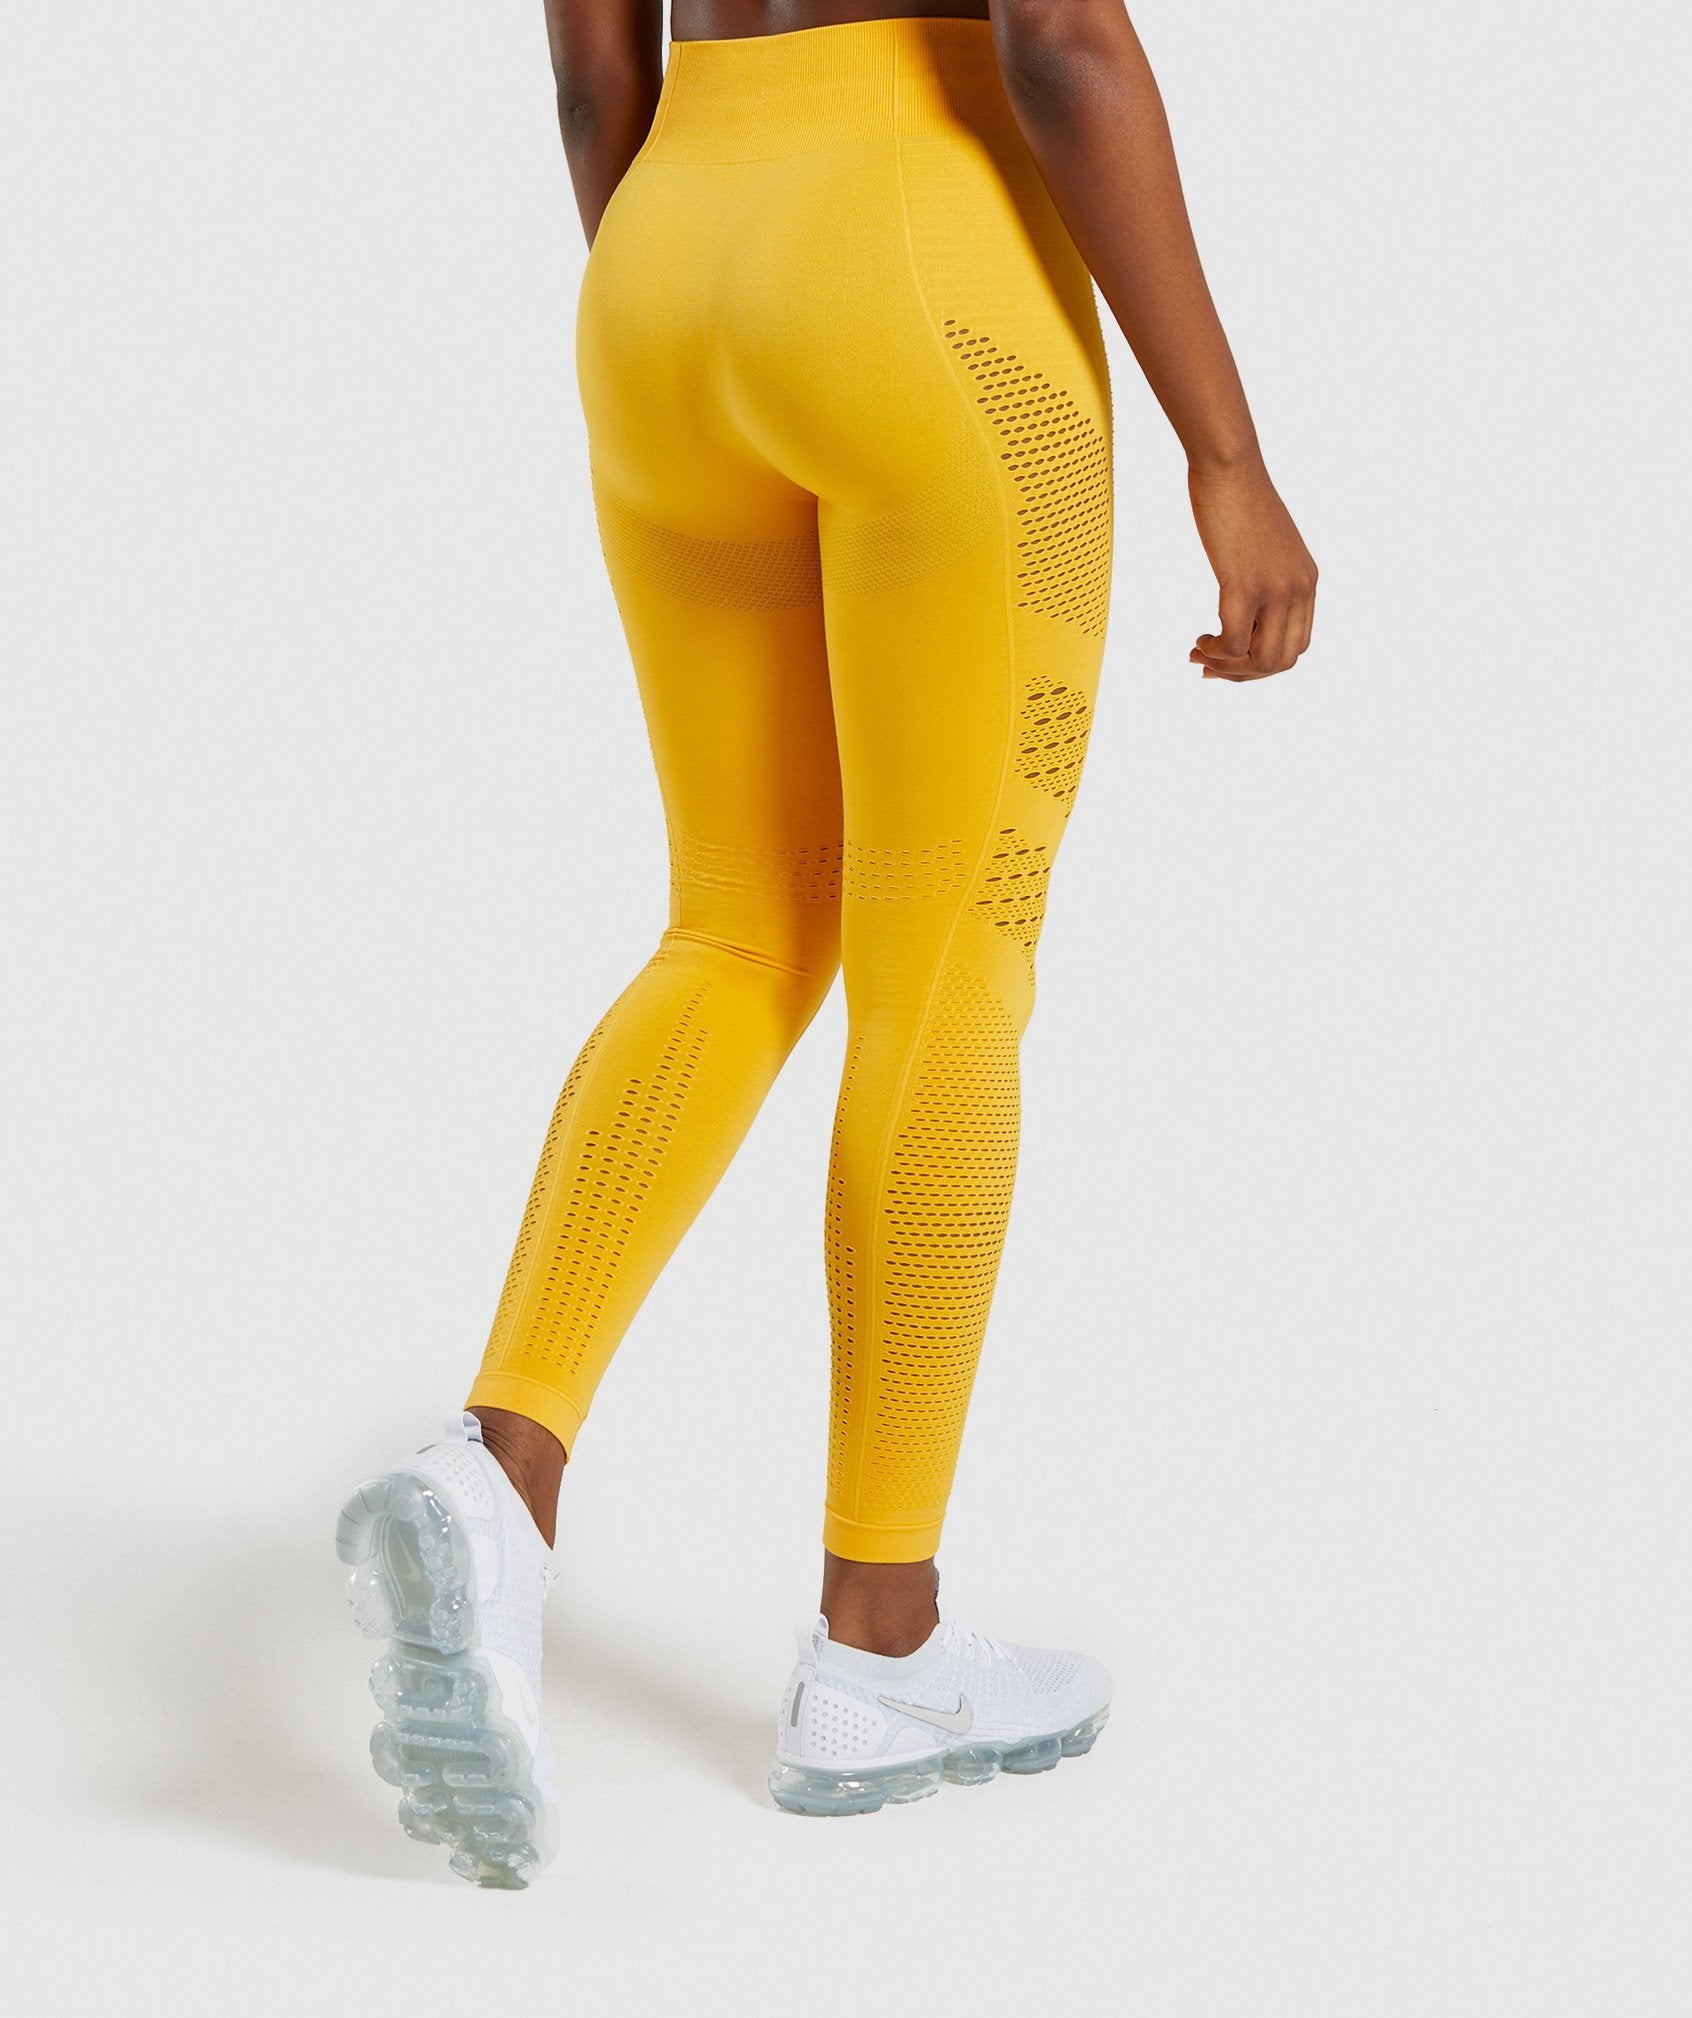 Flawless Knit Tights in Yellow - view 2